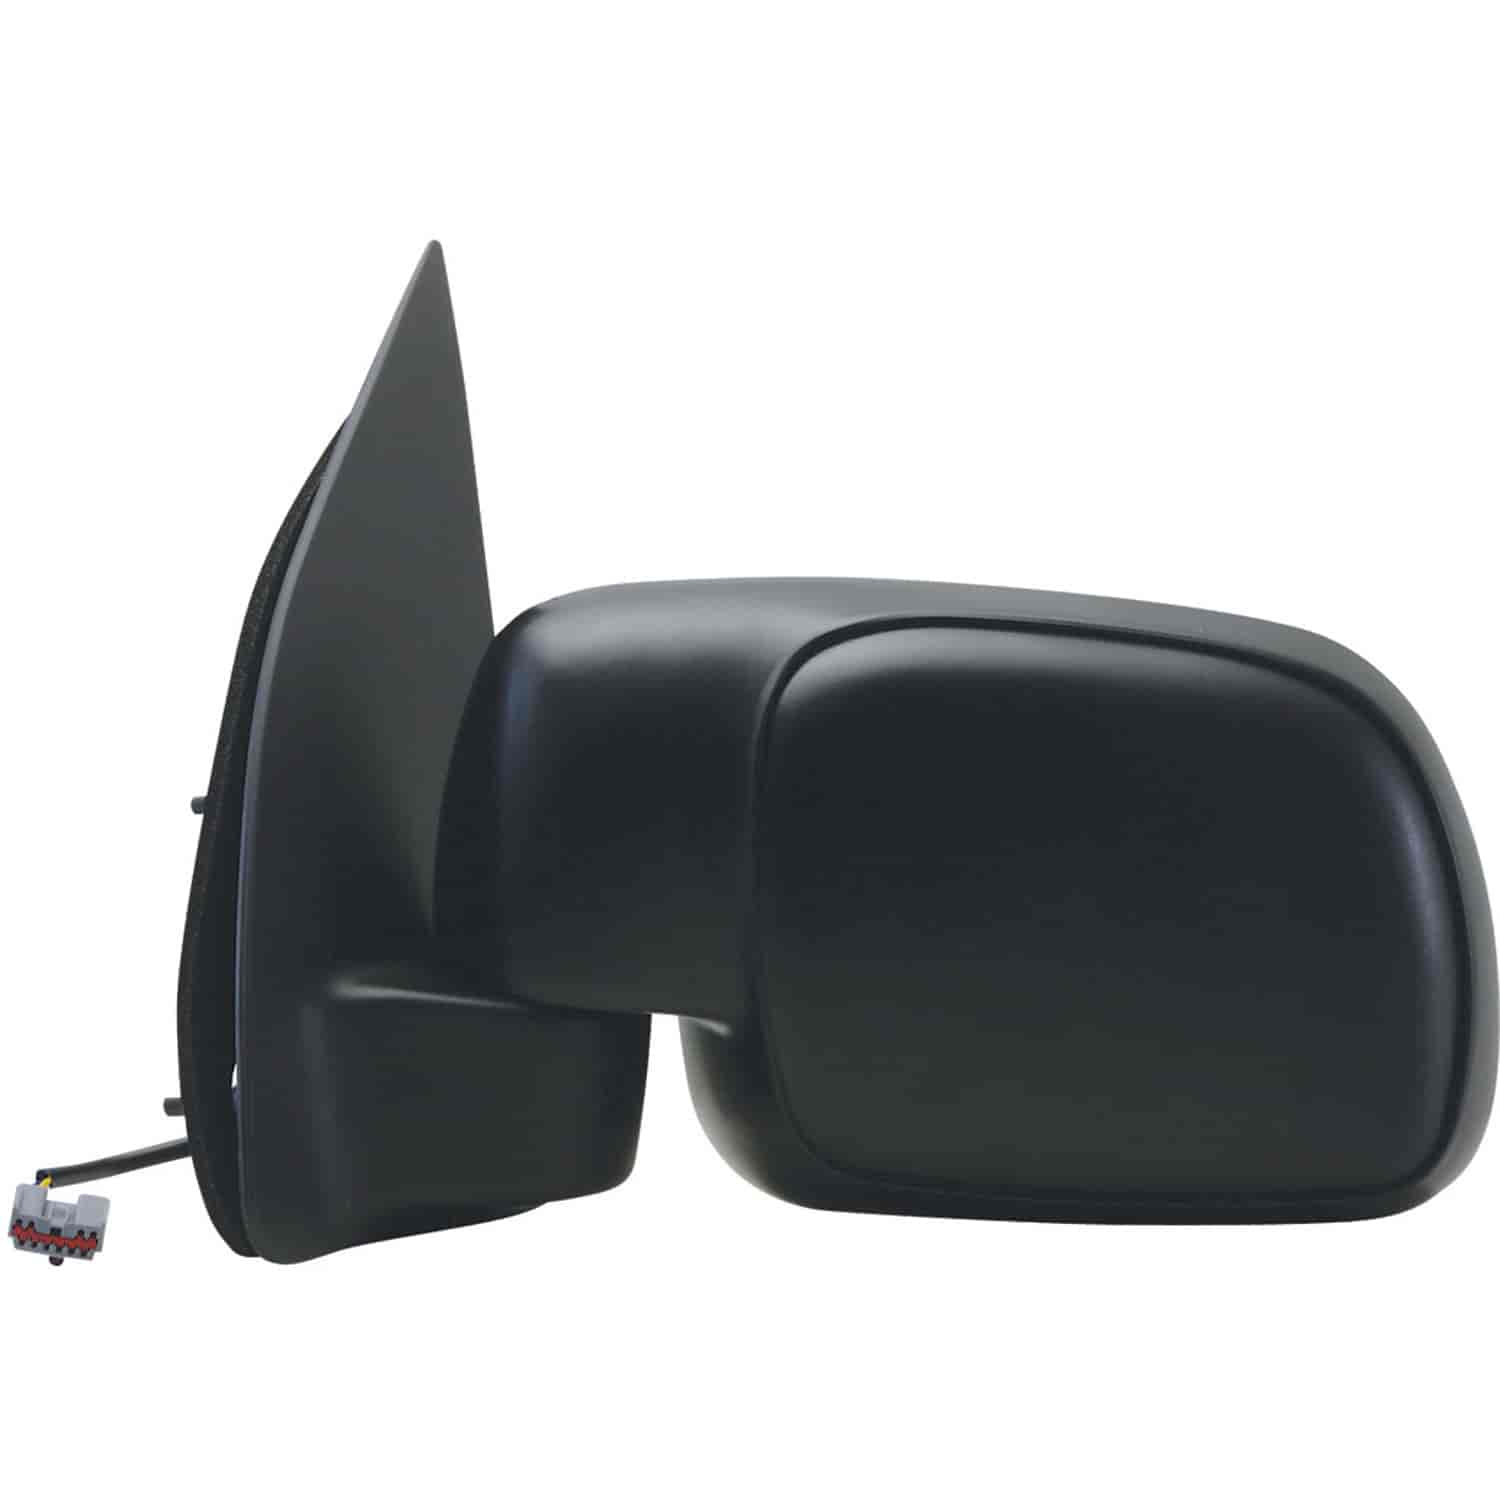 OEM Style Replacement mirror for 01-07 Ford F250